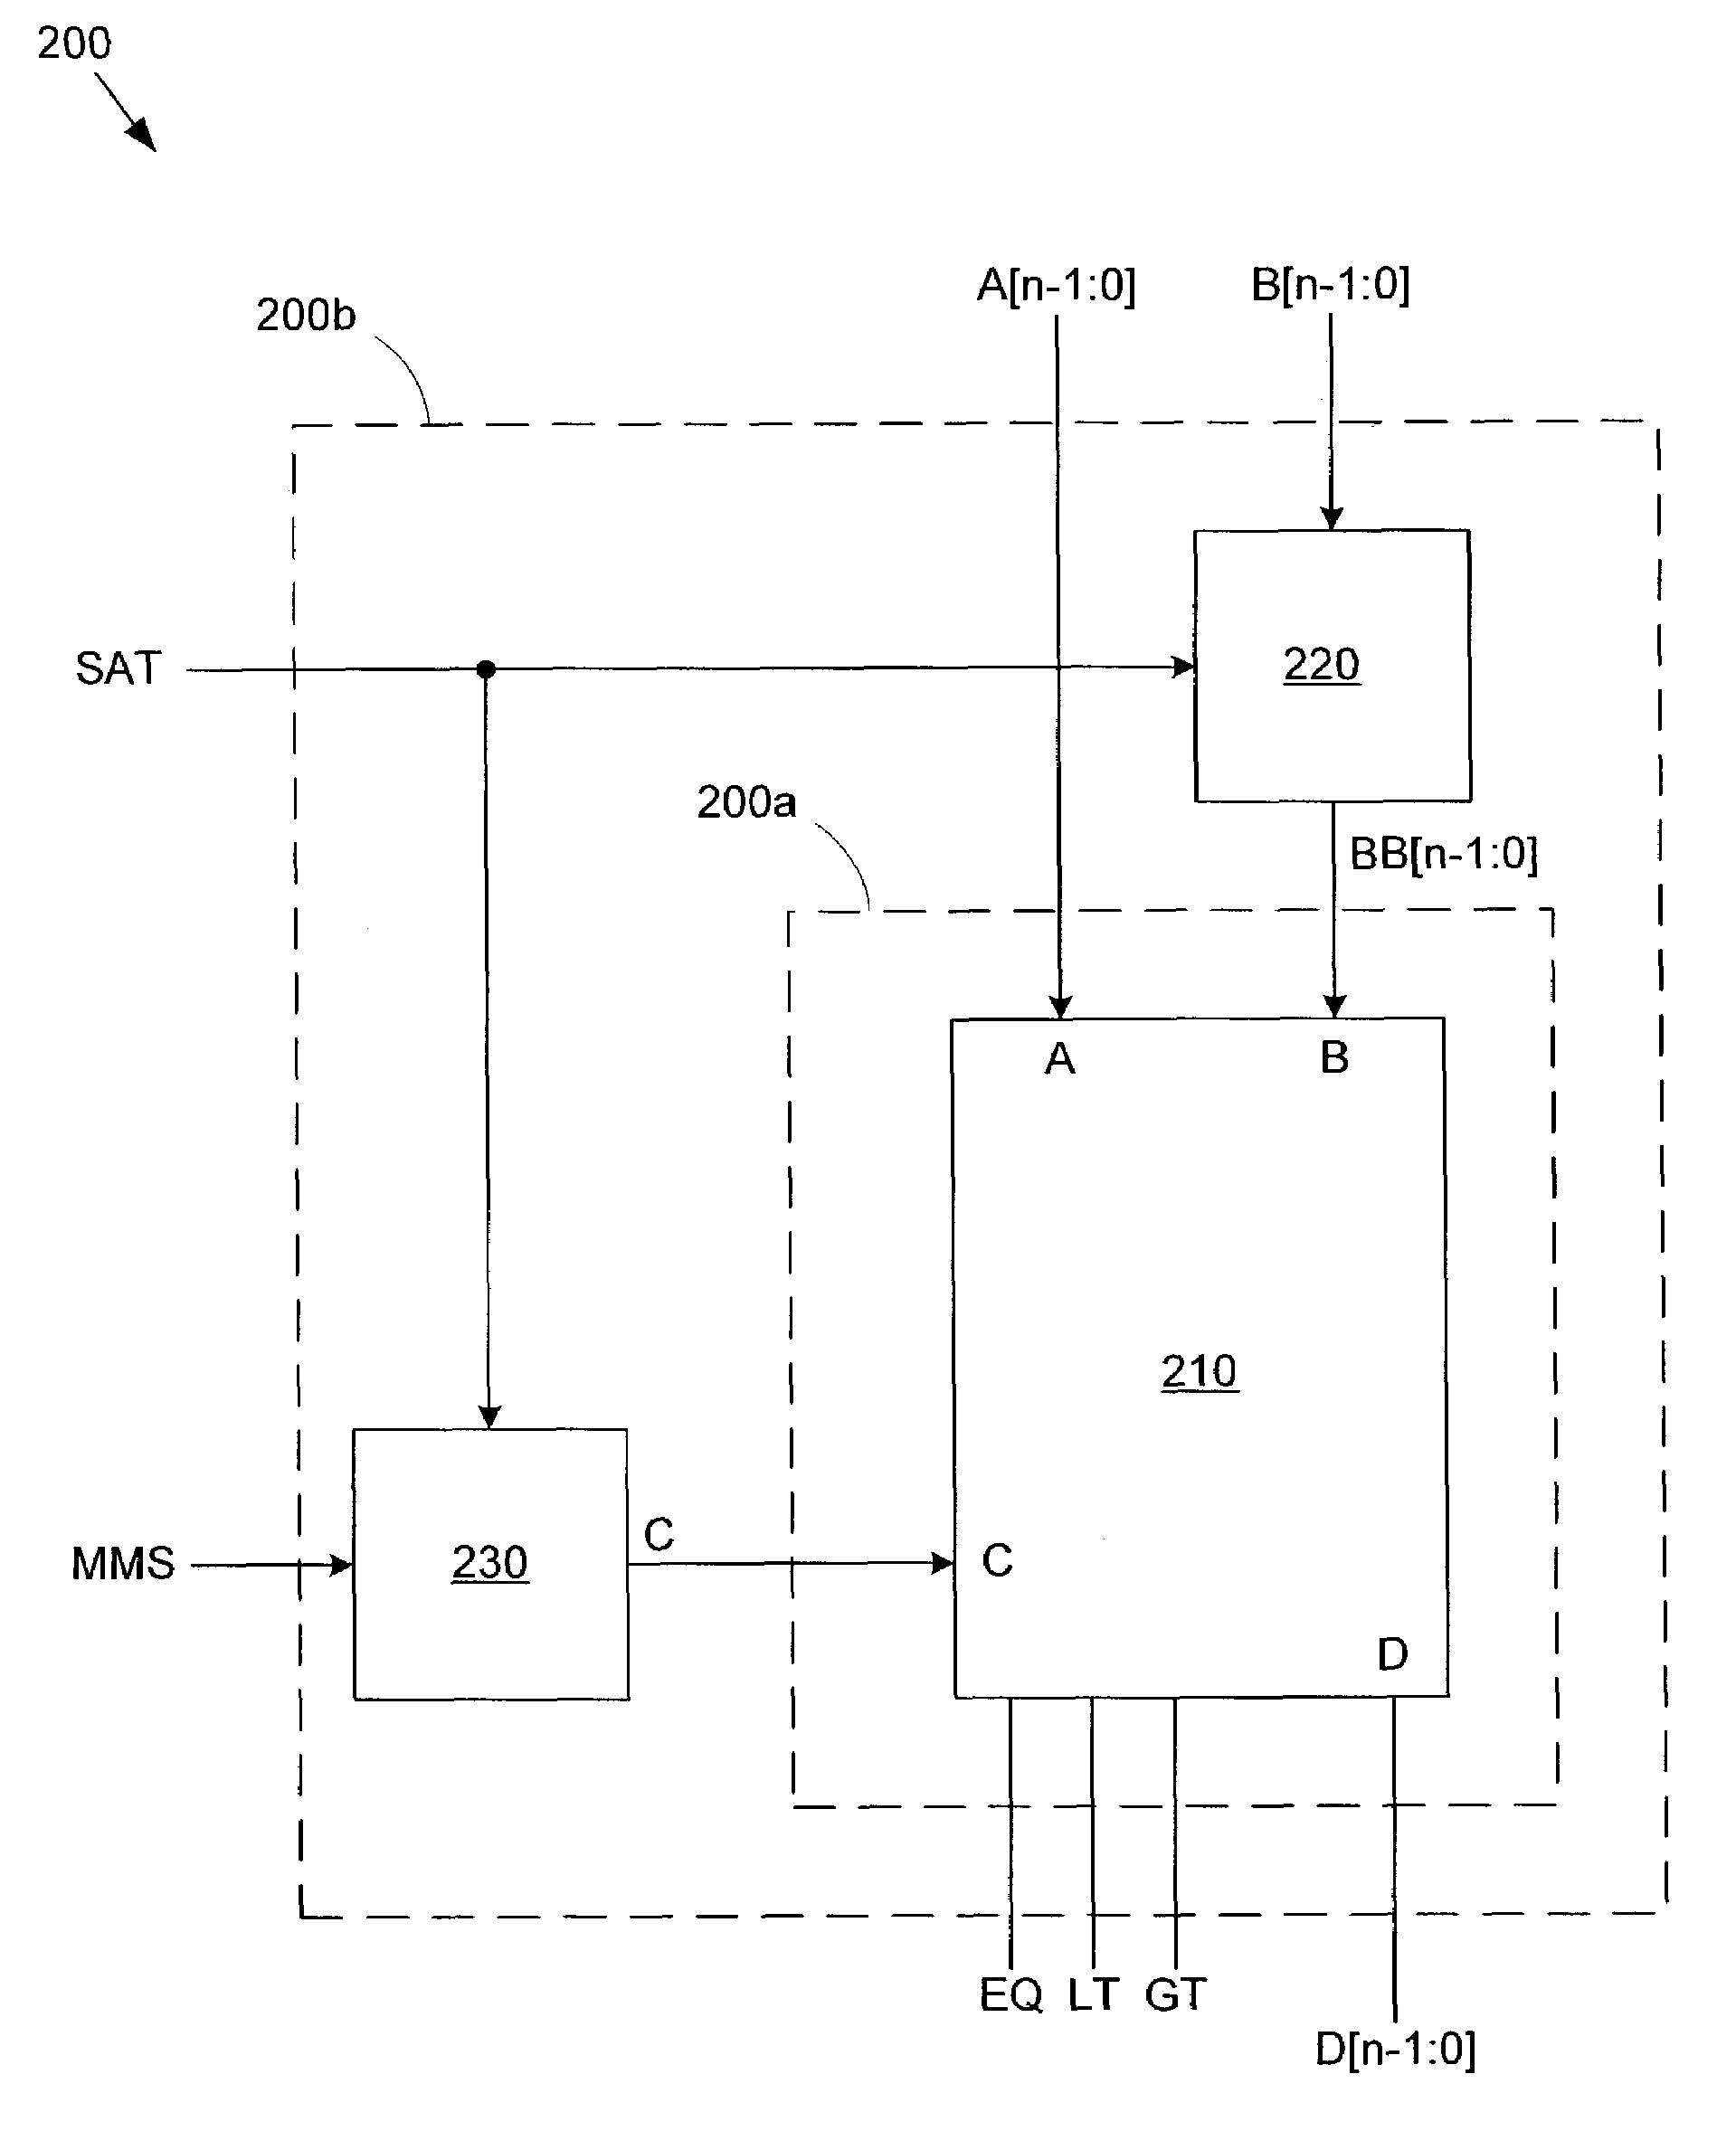 Arithmetic logic unit with merged circuitry for comparison, minimum/maximum selection and saturation for signed and unsigned numbers